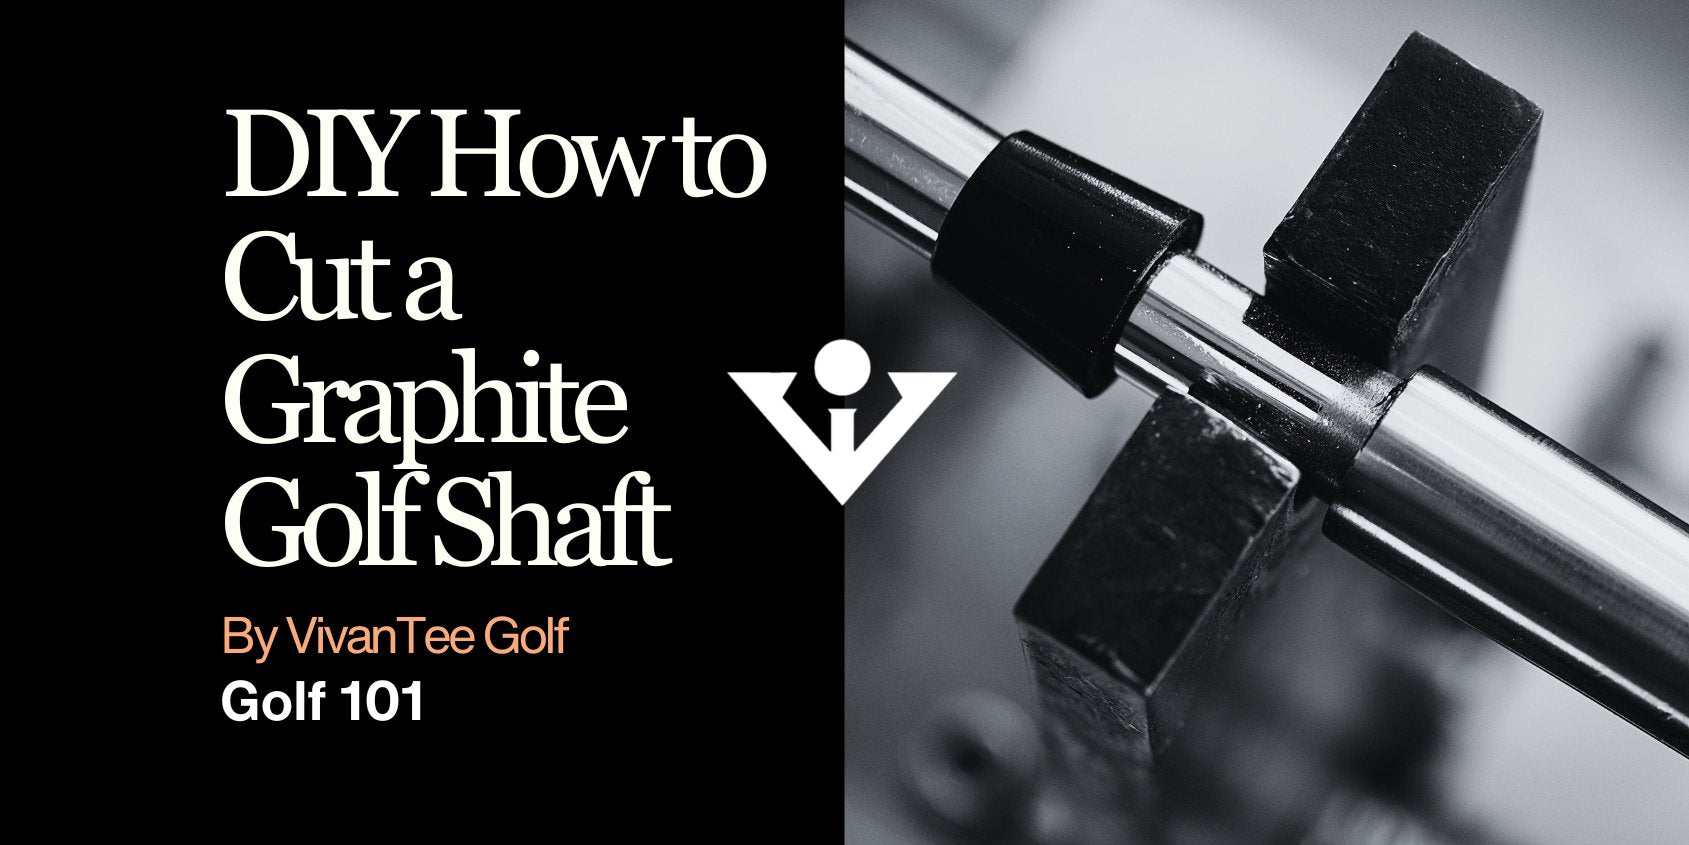 How to cut a graphite golf shaft guide, image of a steel golf shaft.